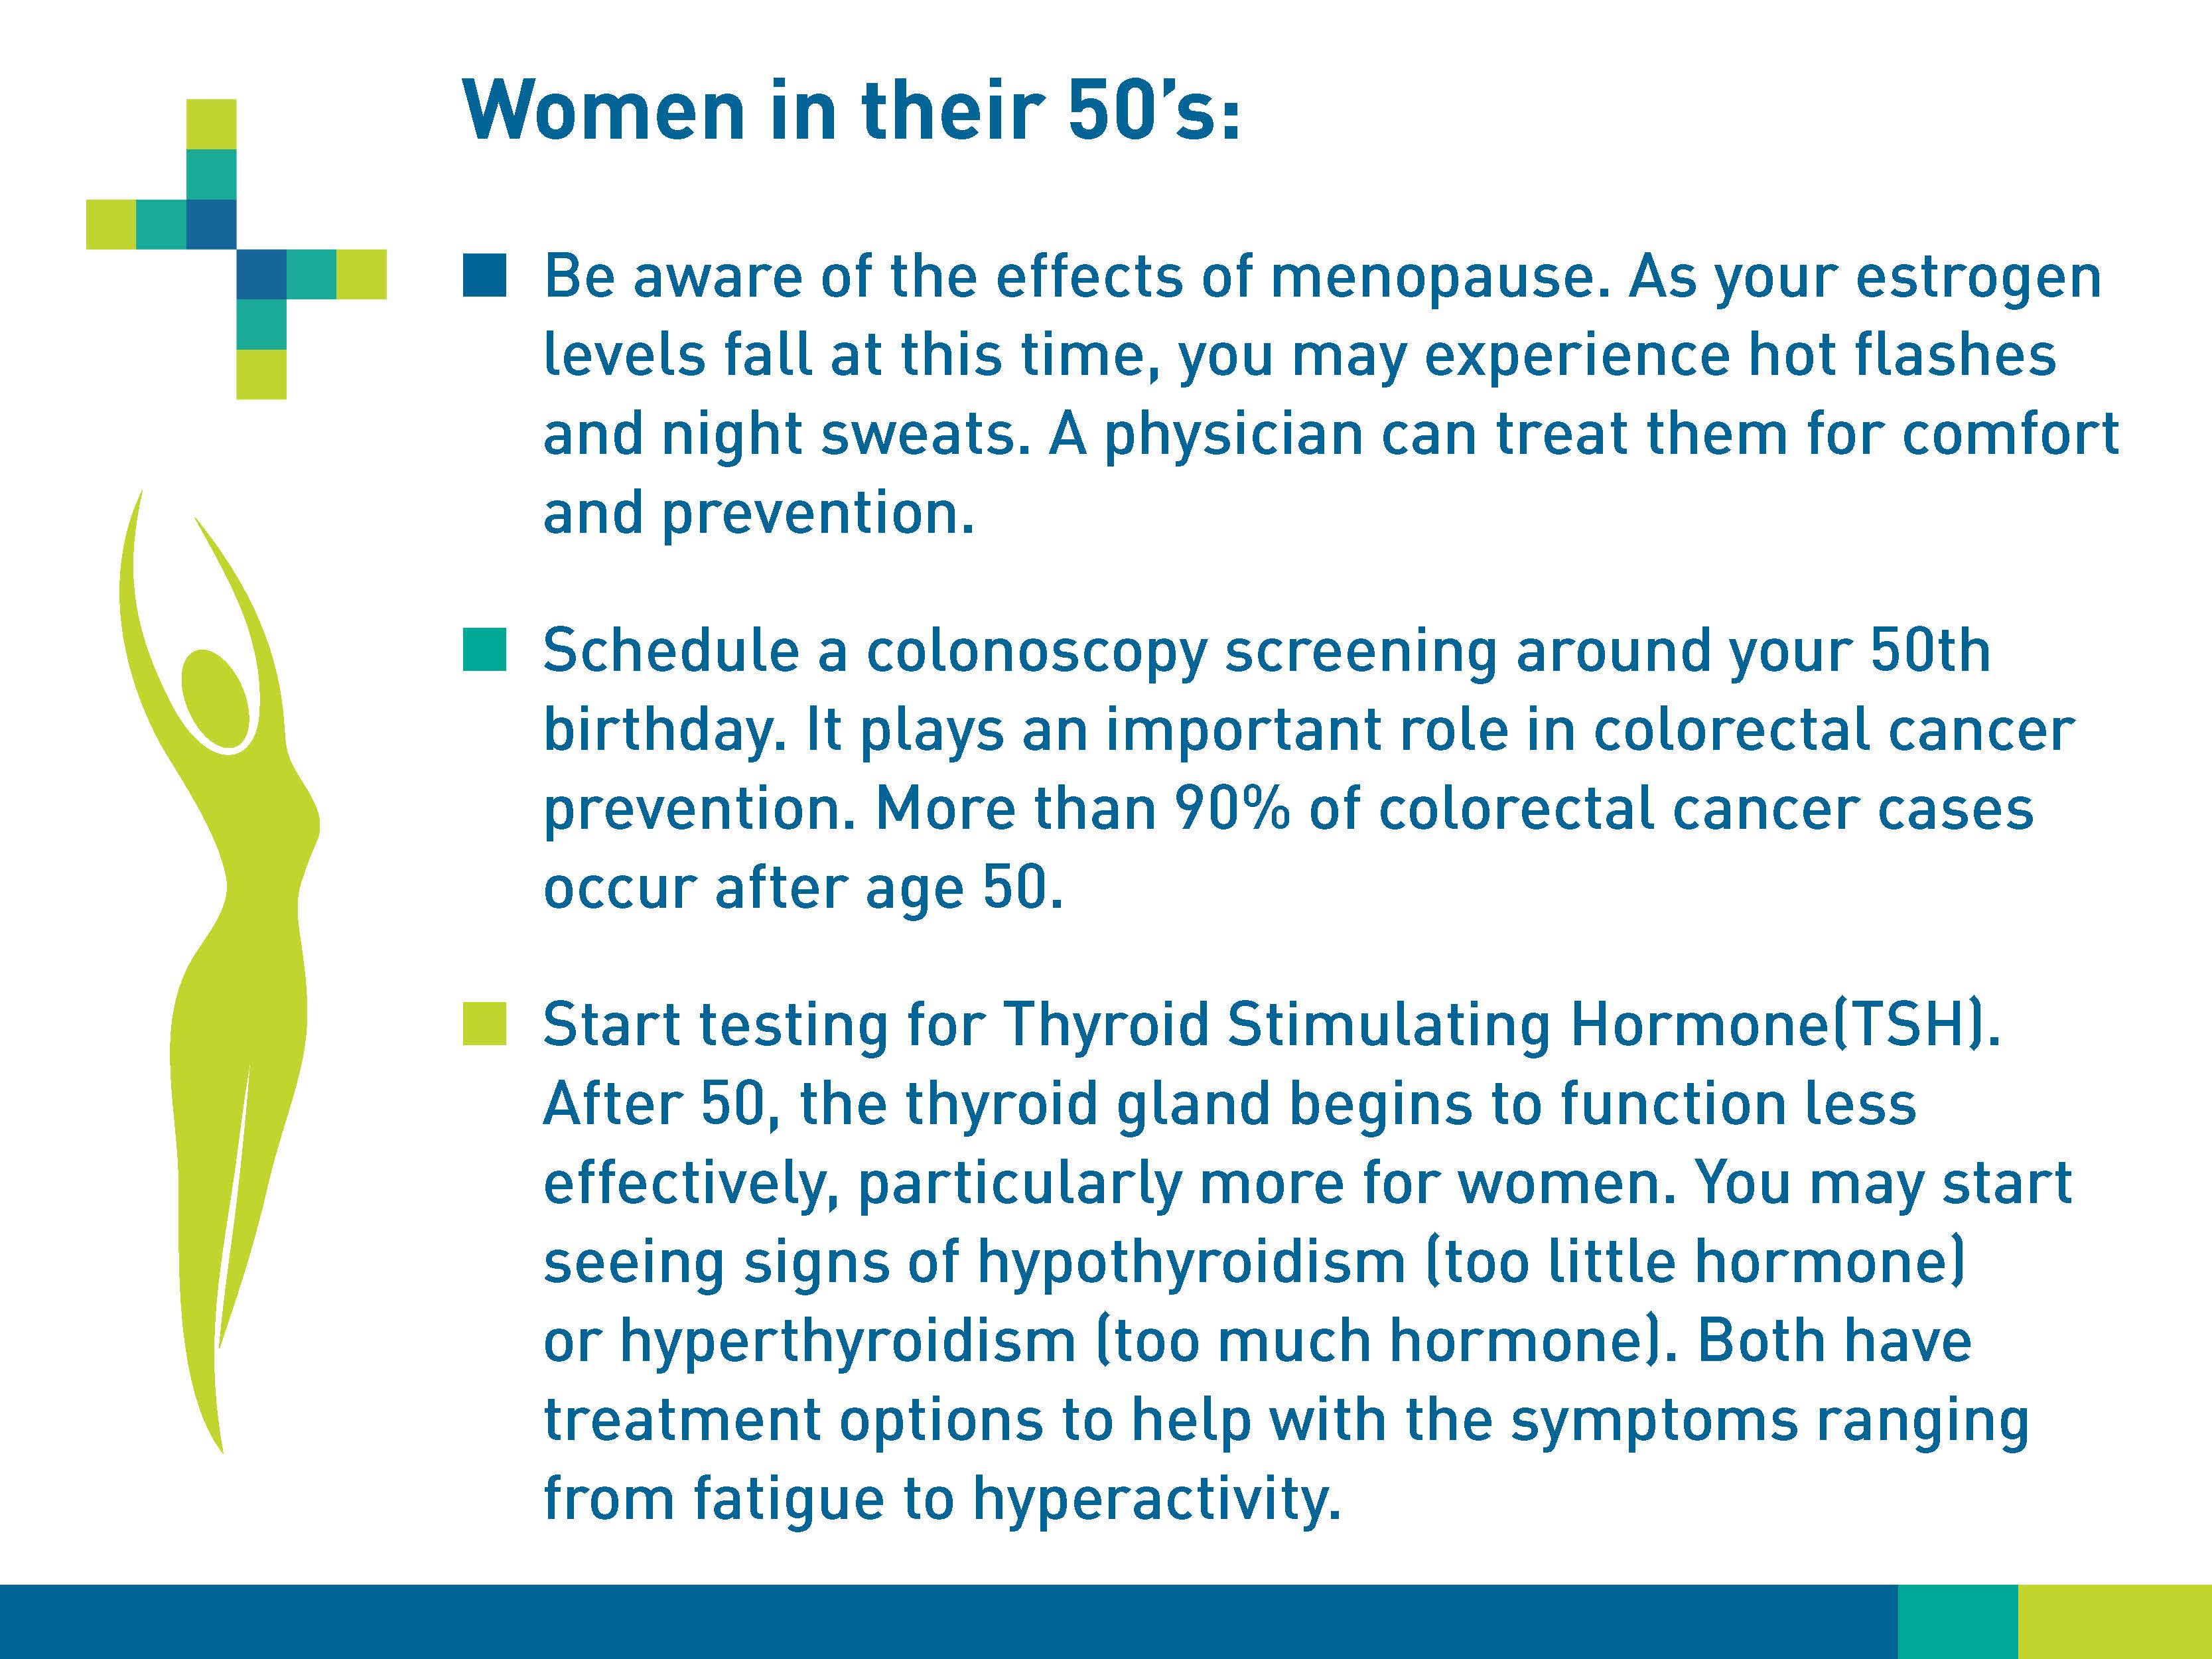 Women in their 50s: Be aware of the effects of menopause. As your estrogen levels fall at this time, you may experience hot flashes and night sweats. A physicians can treat them for comfort and prevention. Schedule a colonoscopy screening around your 50th birthday. It plays an important role in colorectal cancer prevention. More than 90% of colorectal cancer cases occur after 50. Start testing for Thyroid Stimulating Hormone (TSH). After 50, the thyroid gland begins to function less effectivetly, particularly more for women. You may start seeing signs of hyperparathyroidism (too little hormone) or hyperthyroidism (too much hormone). Both have treatment options to help with the symptoms ranging from fatigue to hyperactivity.